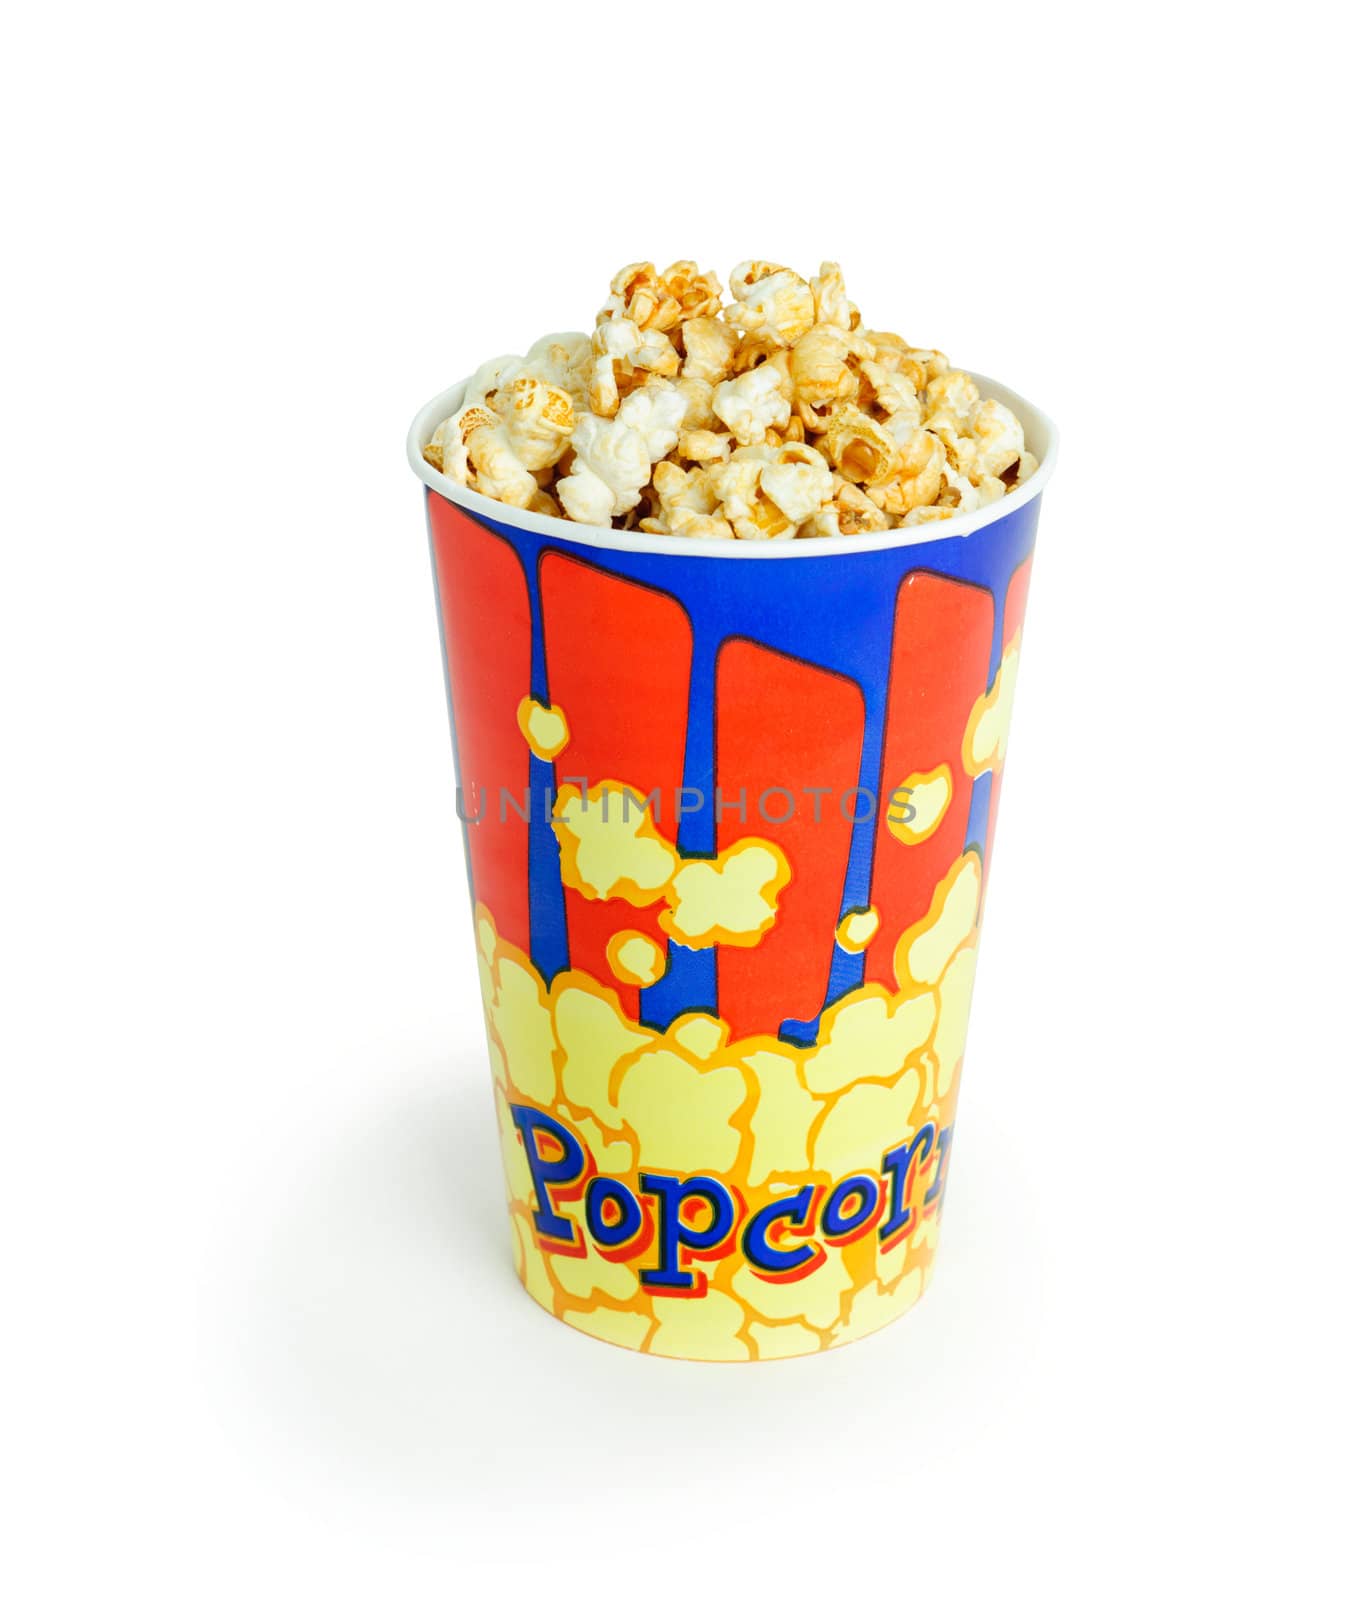 An image of a bucket of popcorn on white background